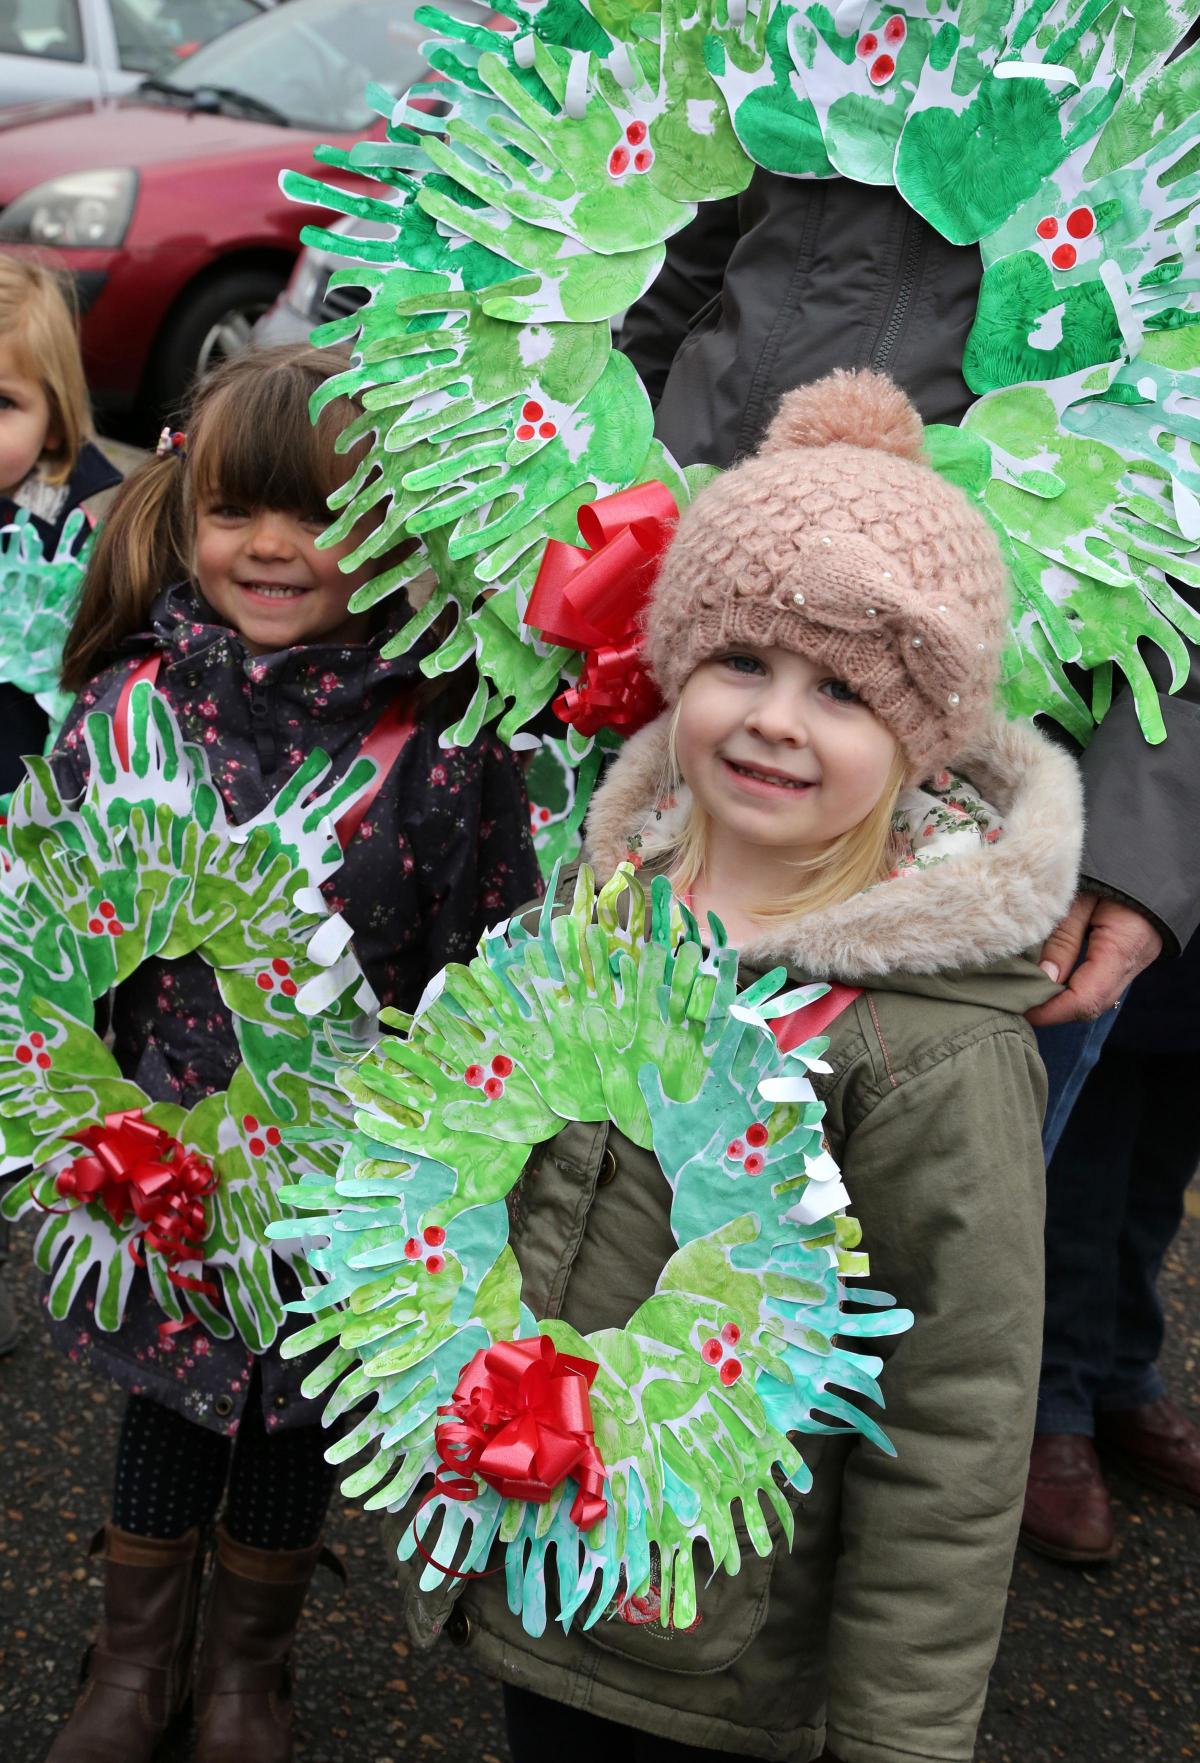 All our pictures from Broadstone Christmas Parade on Saturday December 7, 2013